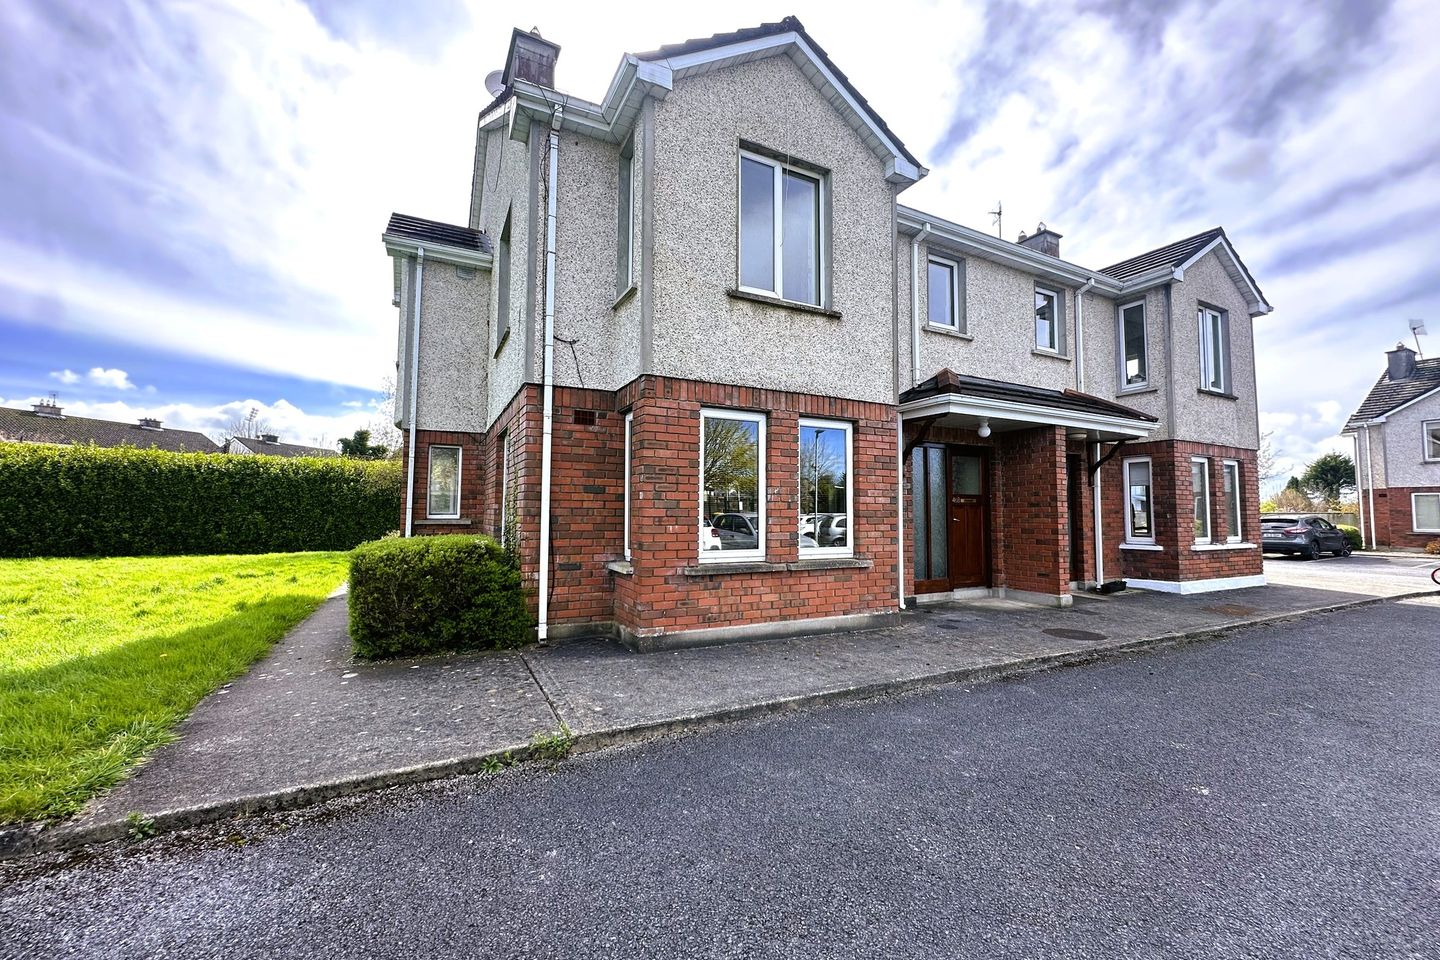 46B Meadow Springs, Clareview, Clareview, Co. Limerick, V94D667